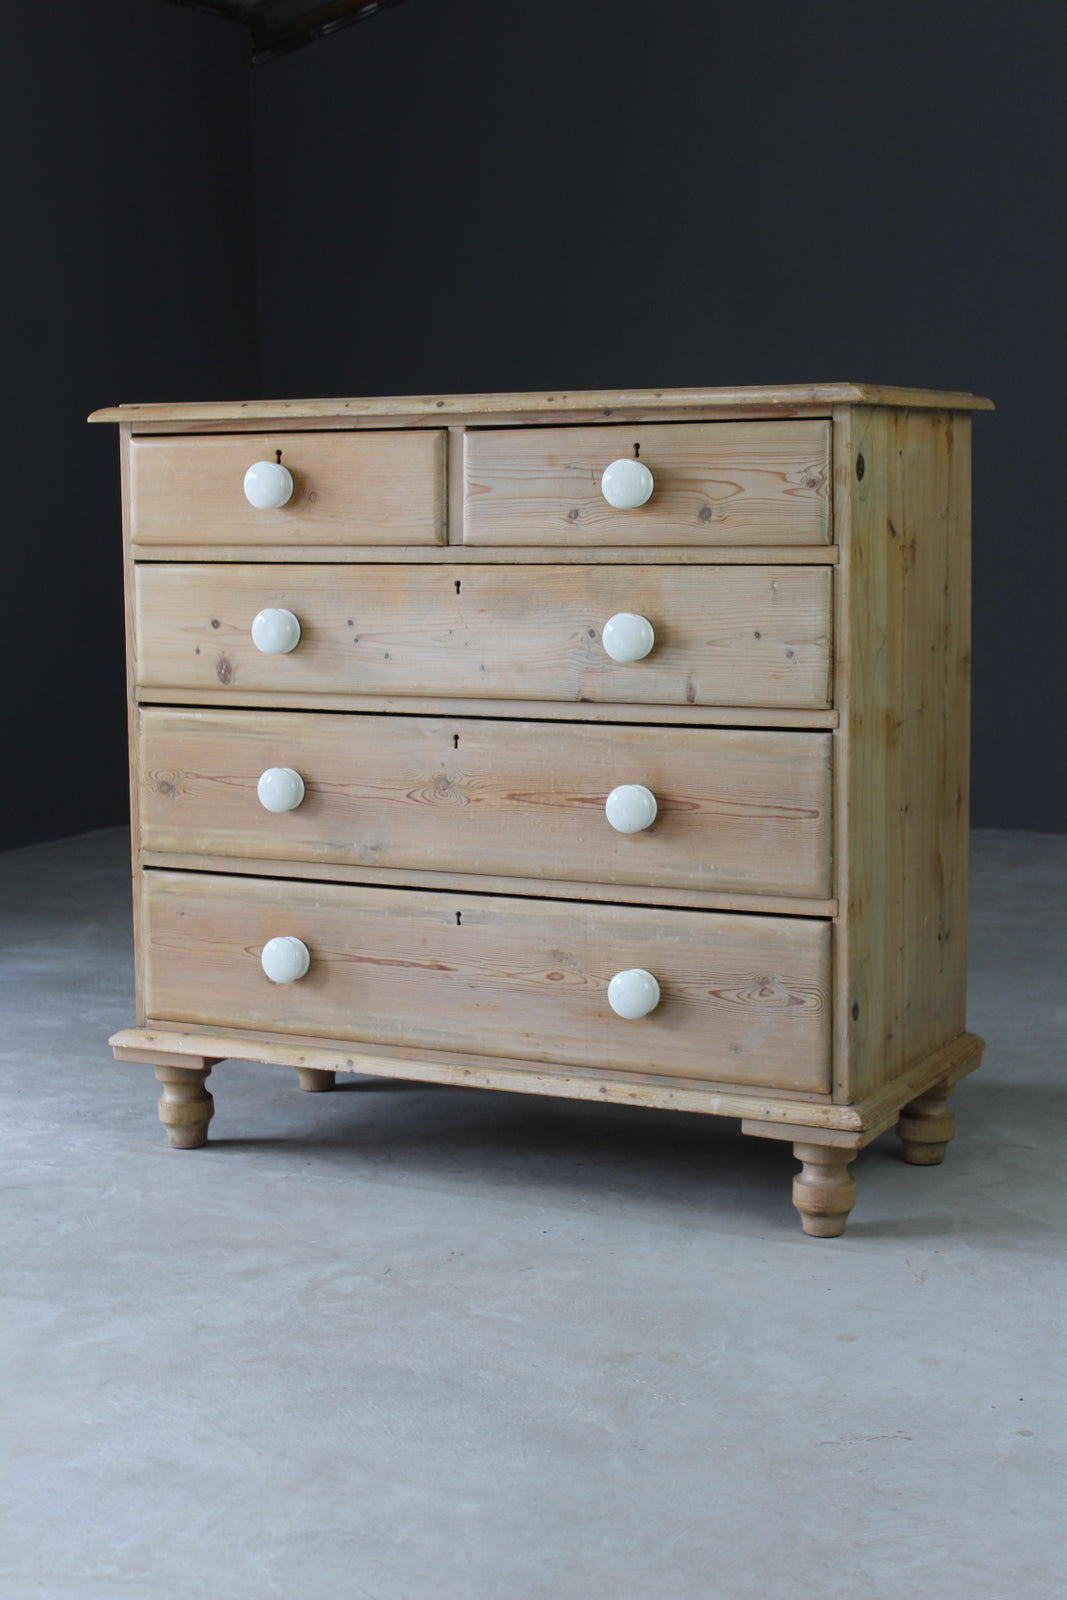 Stripped Pine Rustic Chest of Drawers - Kernow Furniture